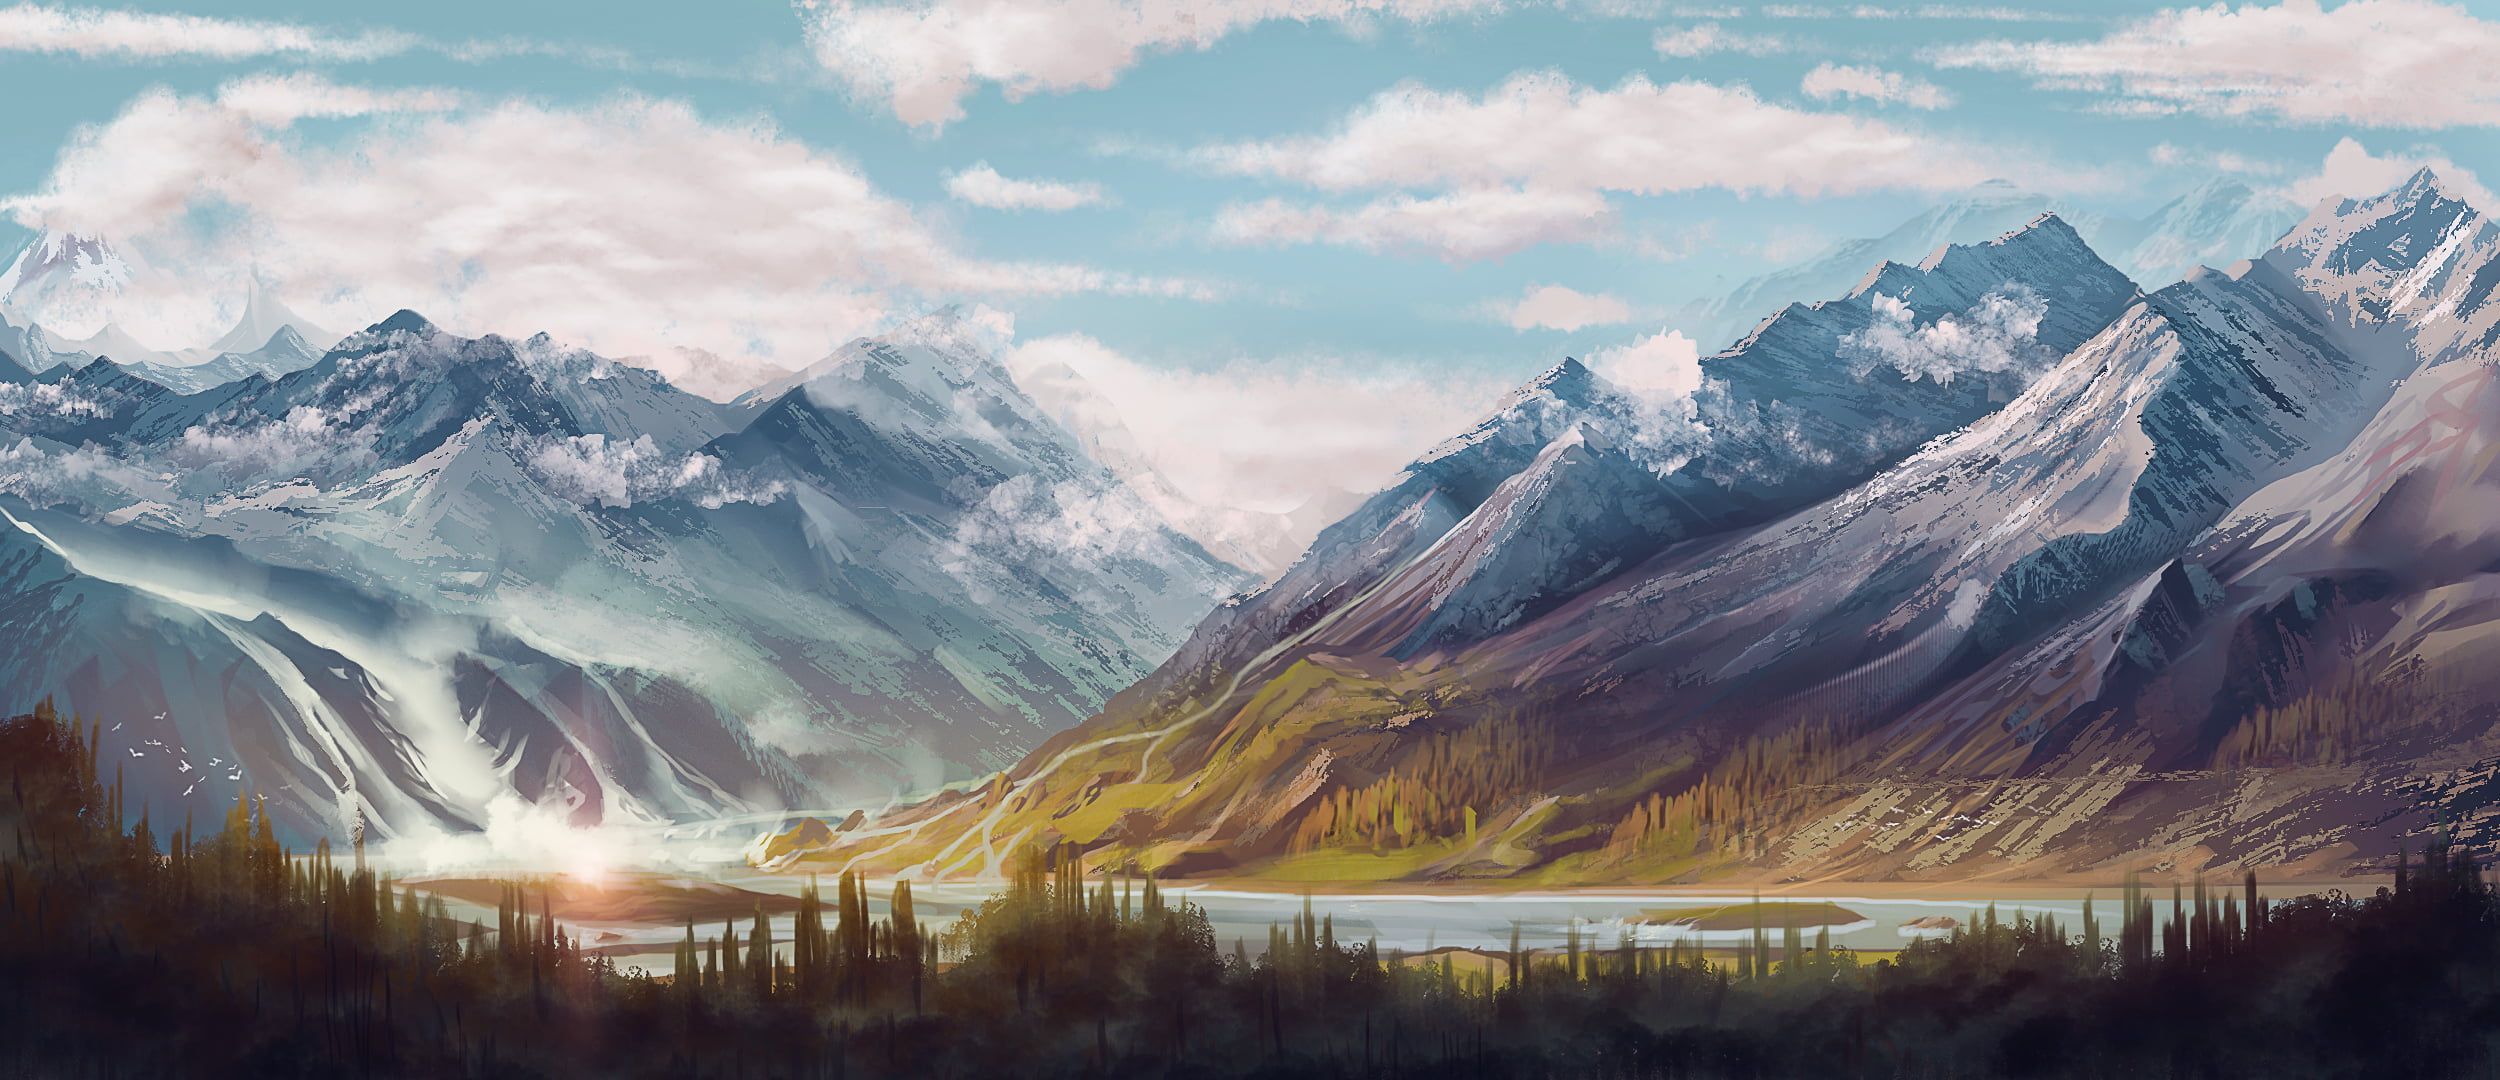 landscape painting of mountain digital art #mountains #forest #clouds #river #sky #artwork P #wallpaper. Landscape paintings, Mountain paintings, Landscape